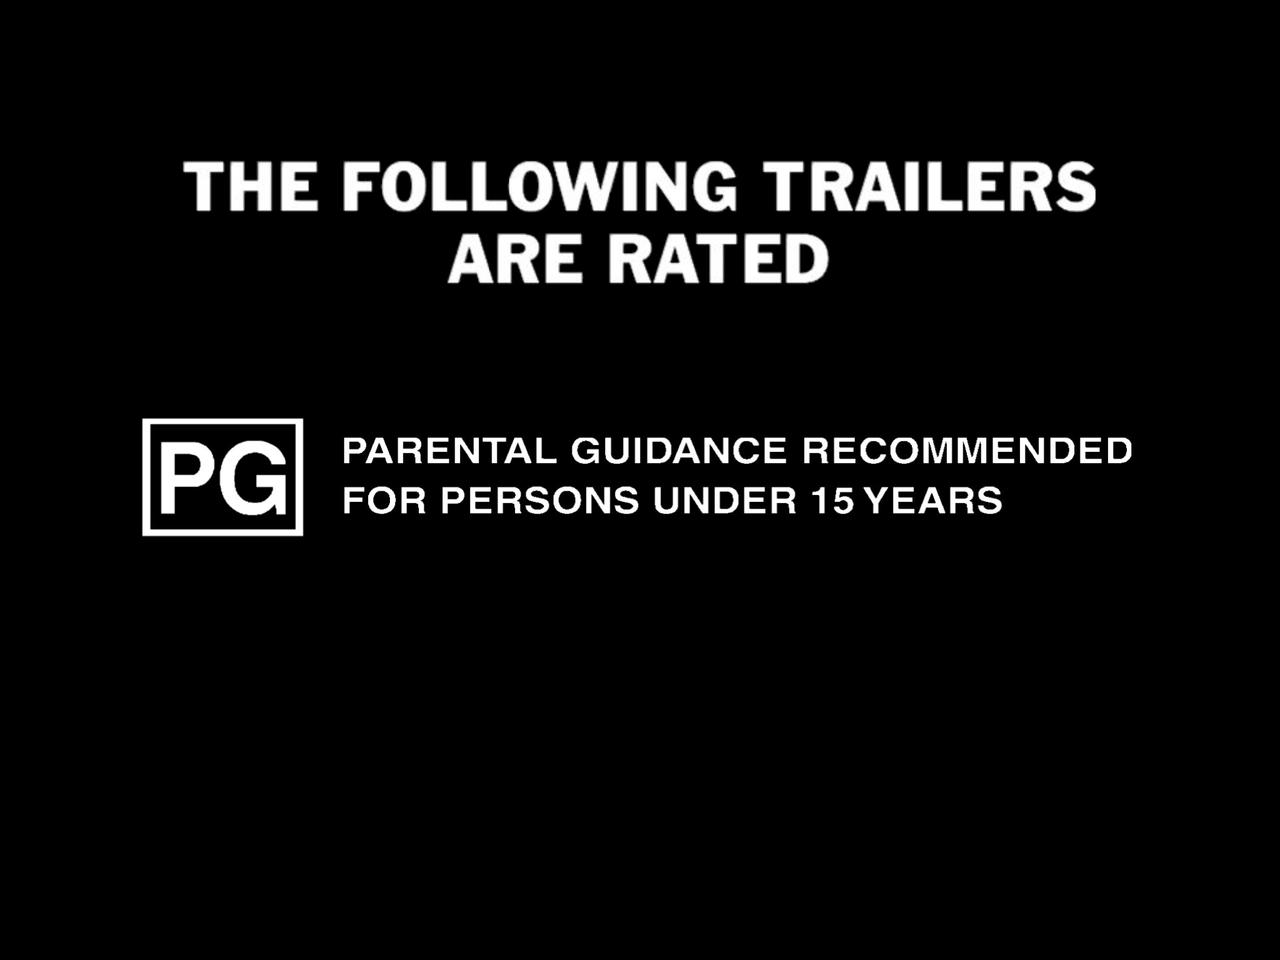 MPAA Rated PG (2013) (1080p HD) 